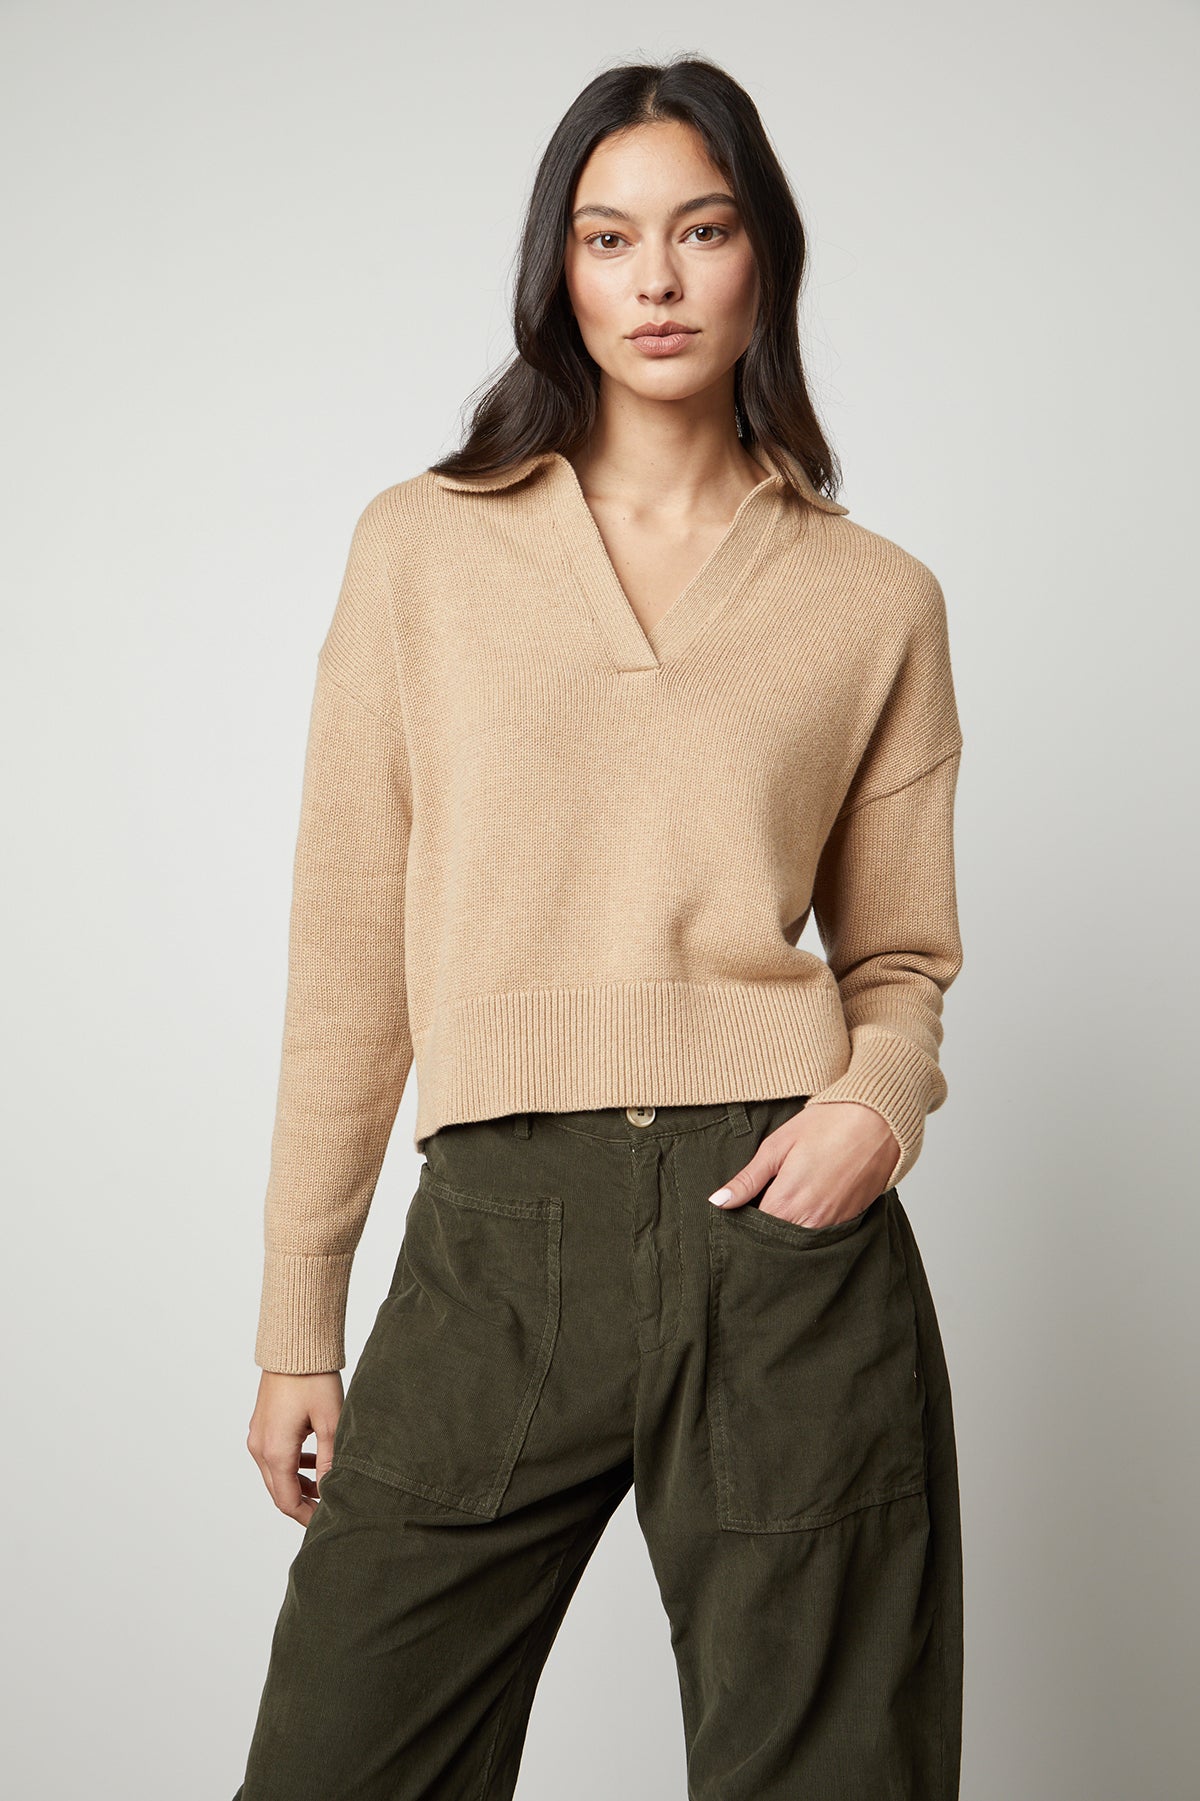   The model is wearing a LUCIE POLO SWEATER by Velvet by Graham & Spencer and olive pants. 